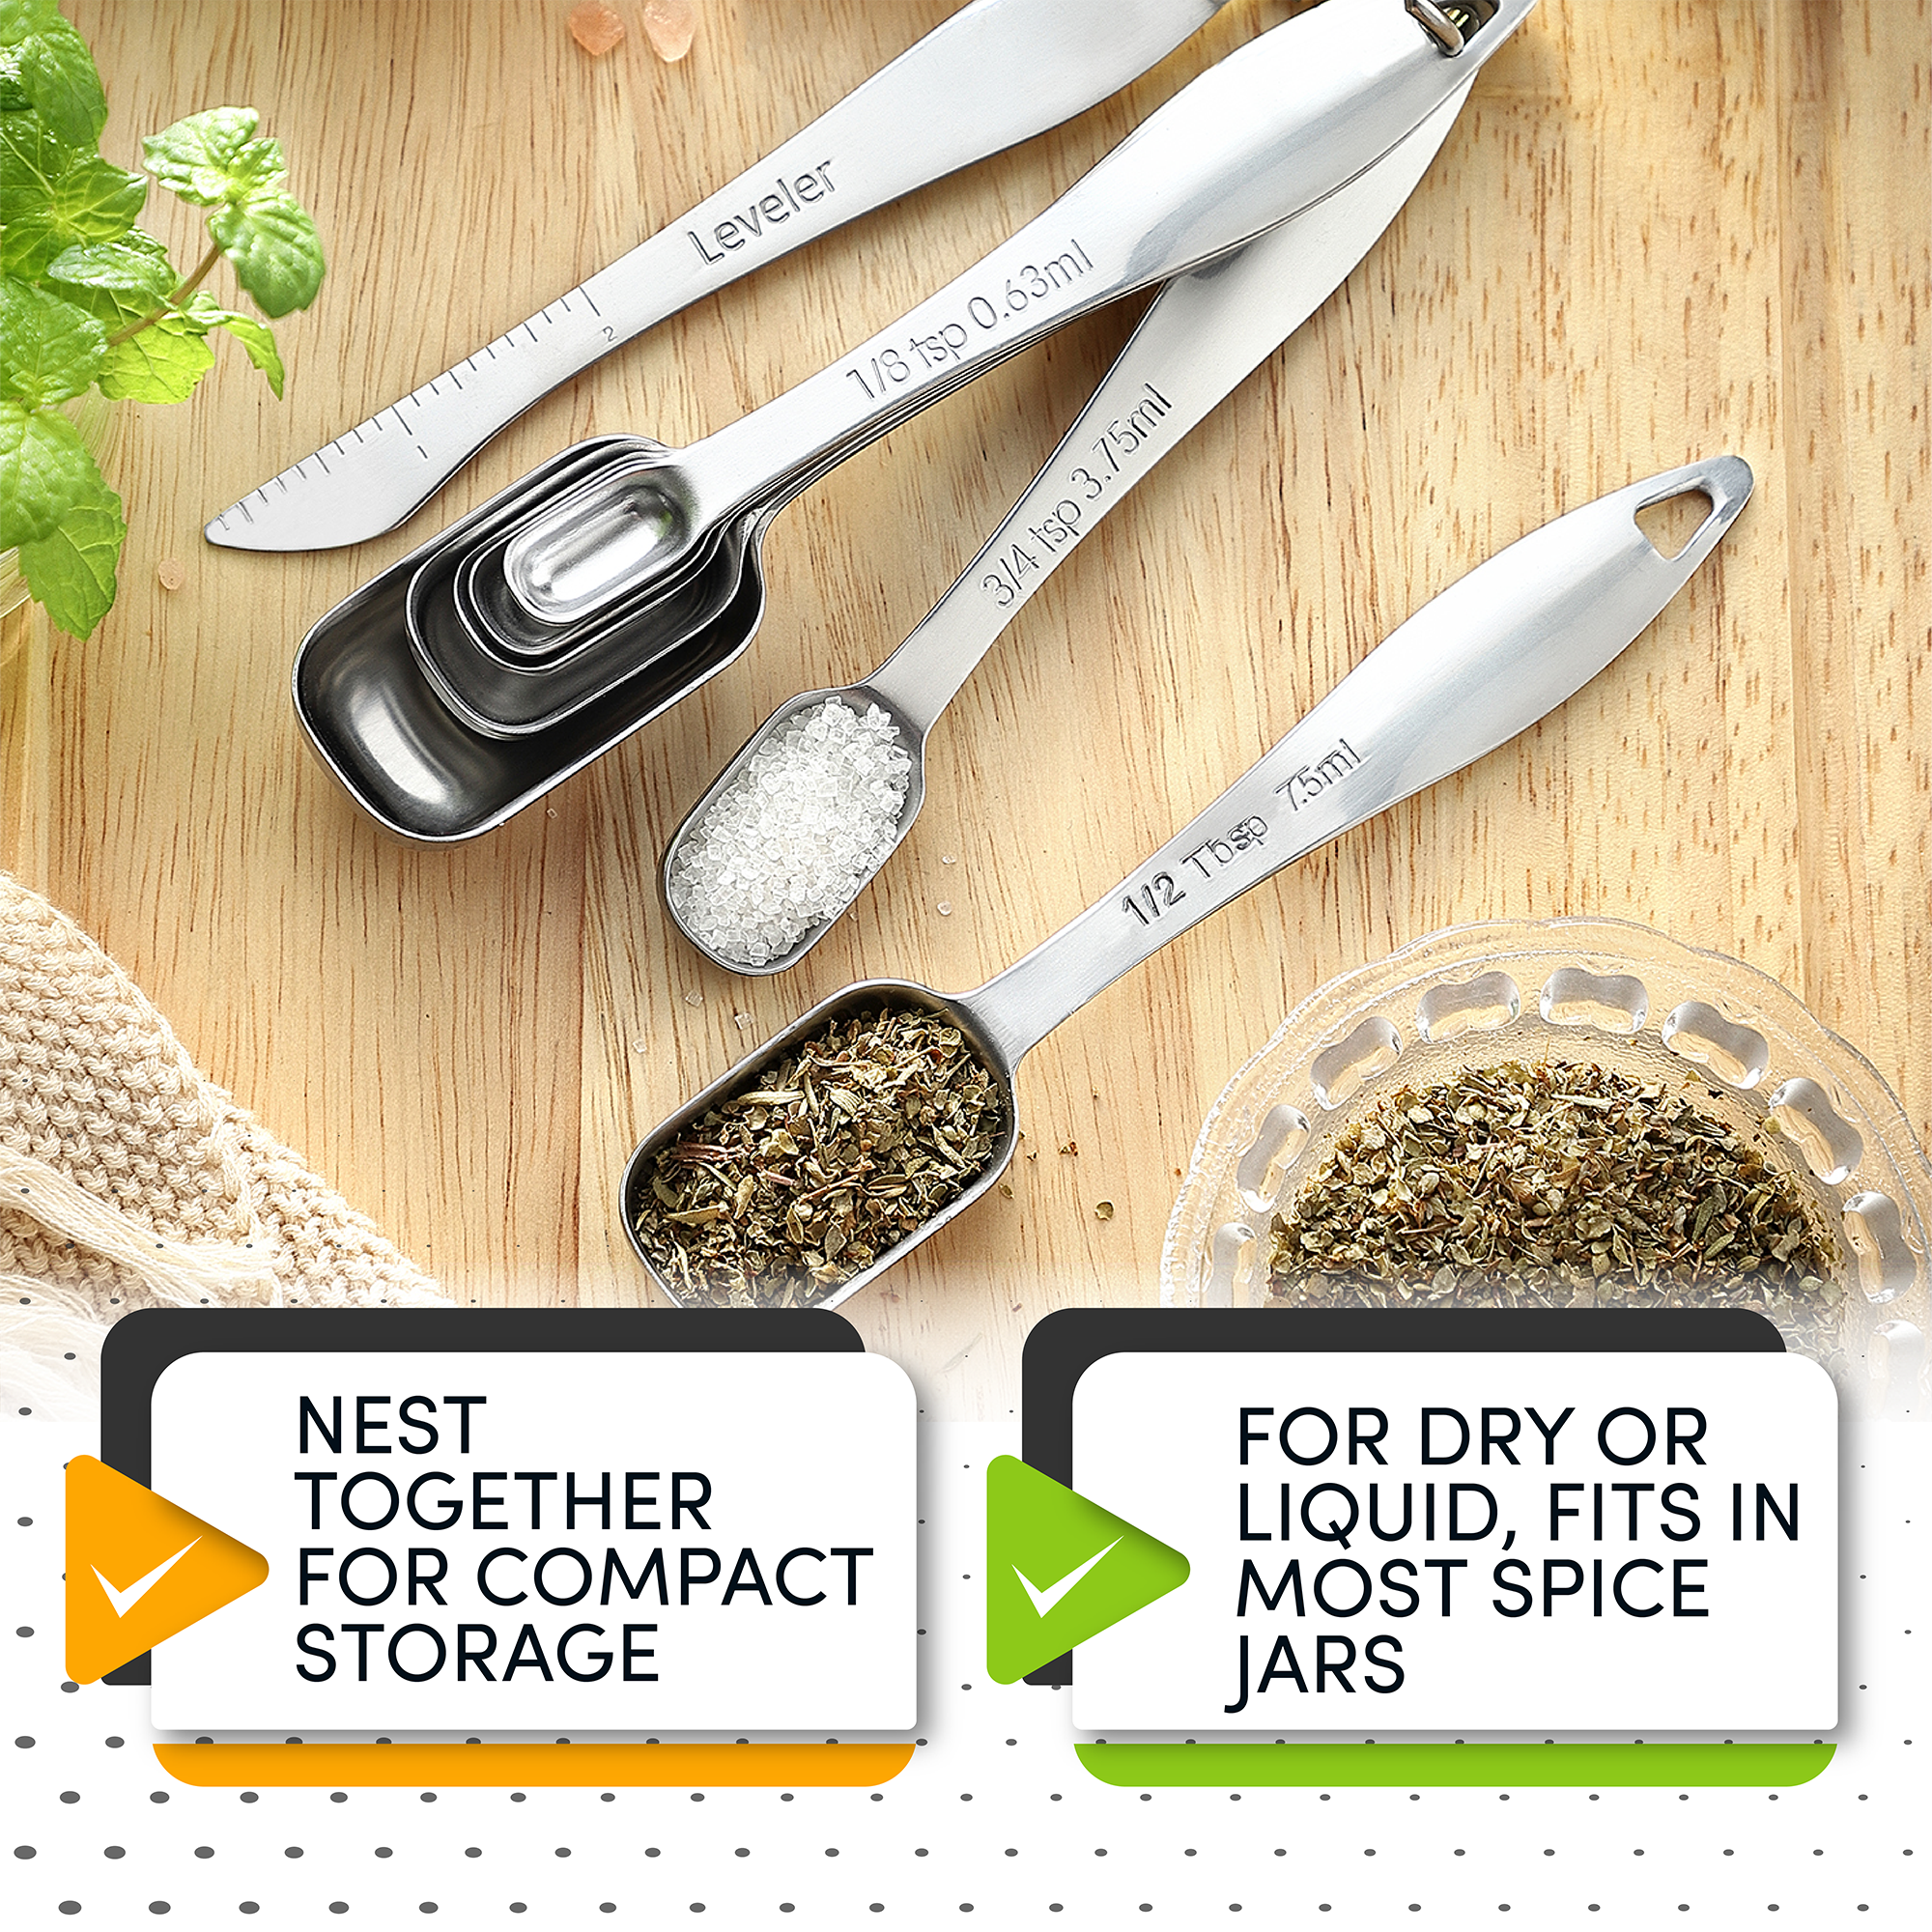 Spring Chef - Round Stainless Steel Measuring Spoons with Handy Leveler,  Easy to Read Markings for Measuring Dry or Liquid Ingredients, Medicine,  and